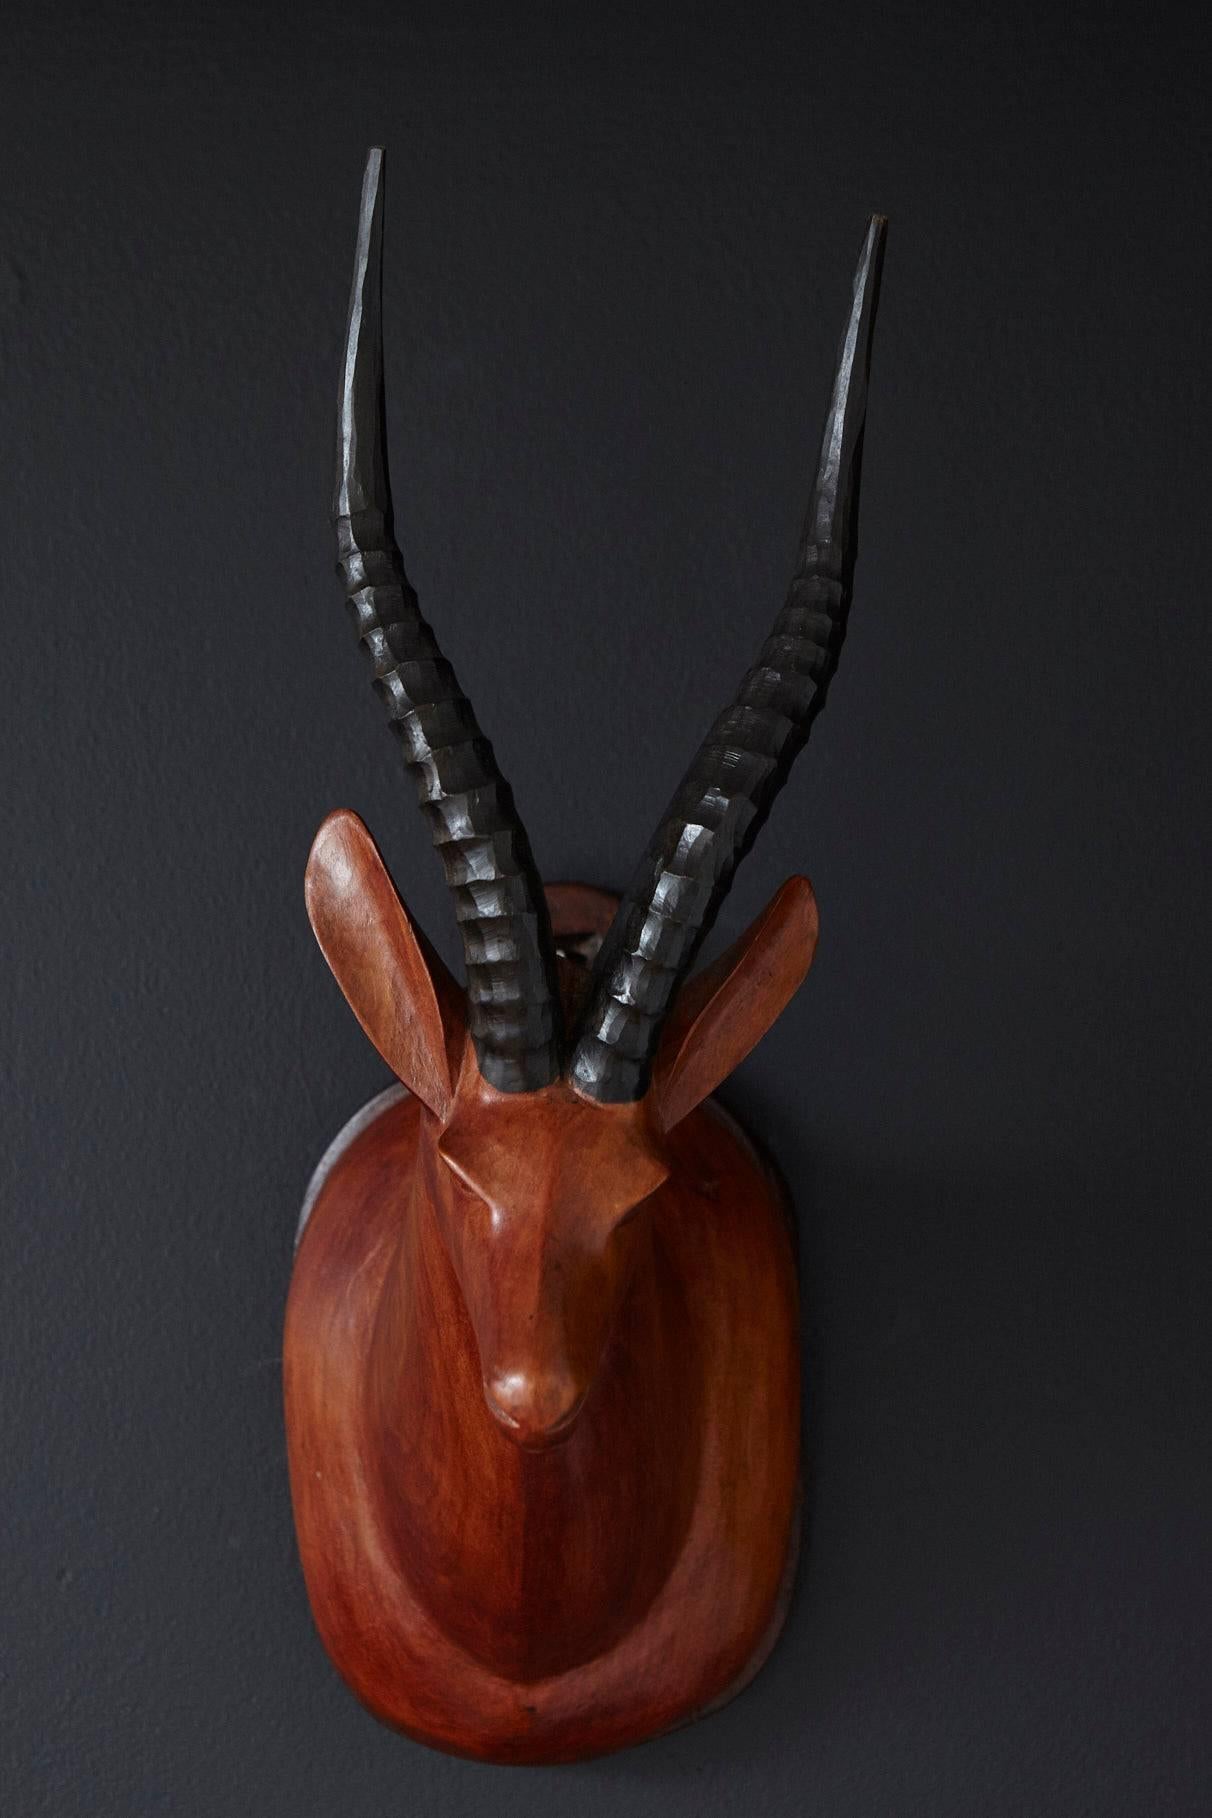 A nice alternative to the typical antlers, a midcentury hand-carved antelope wall mount.